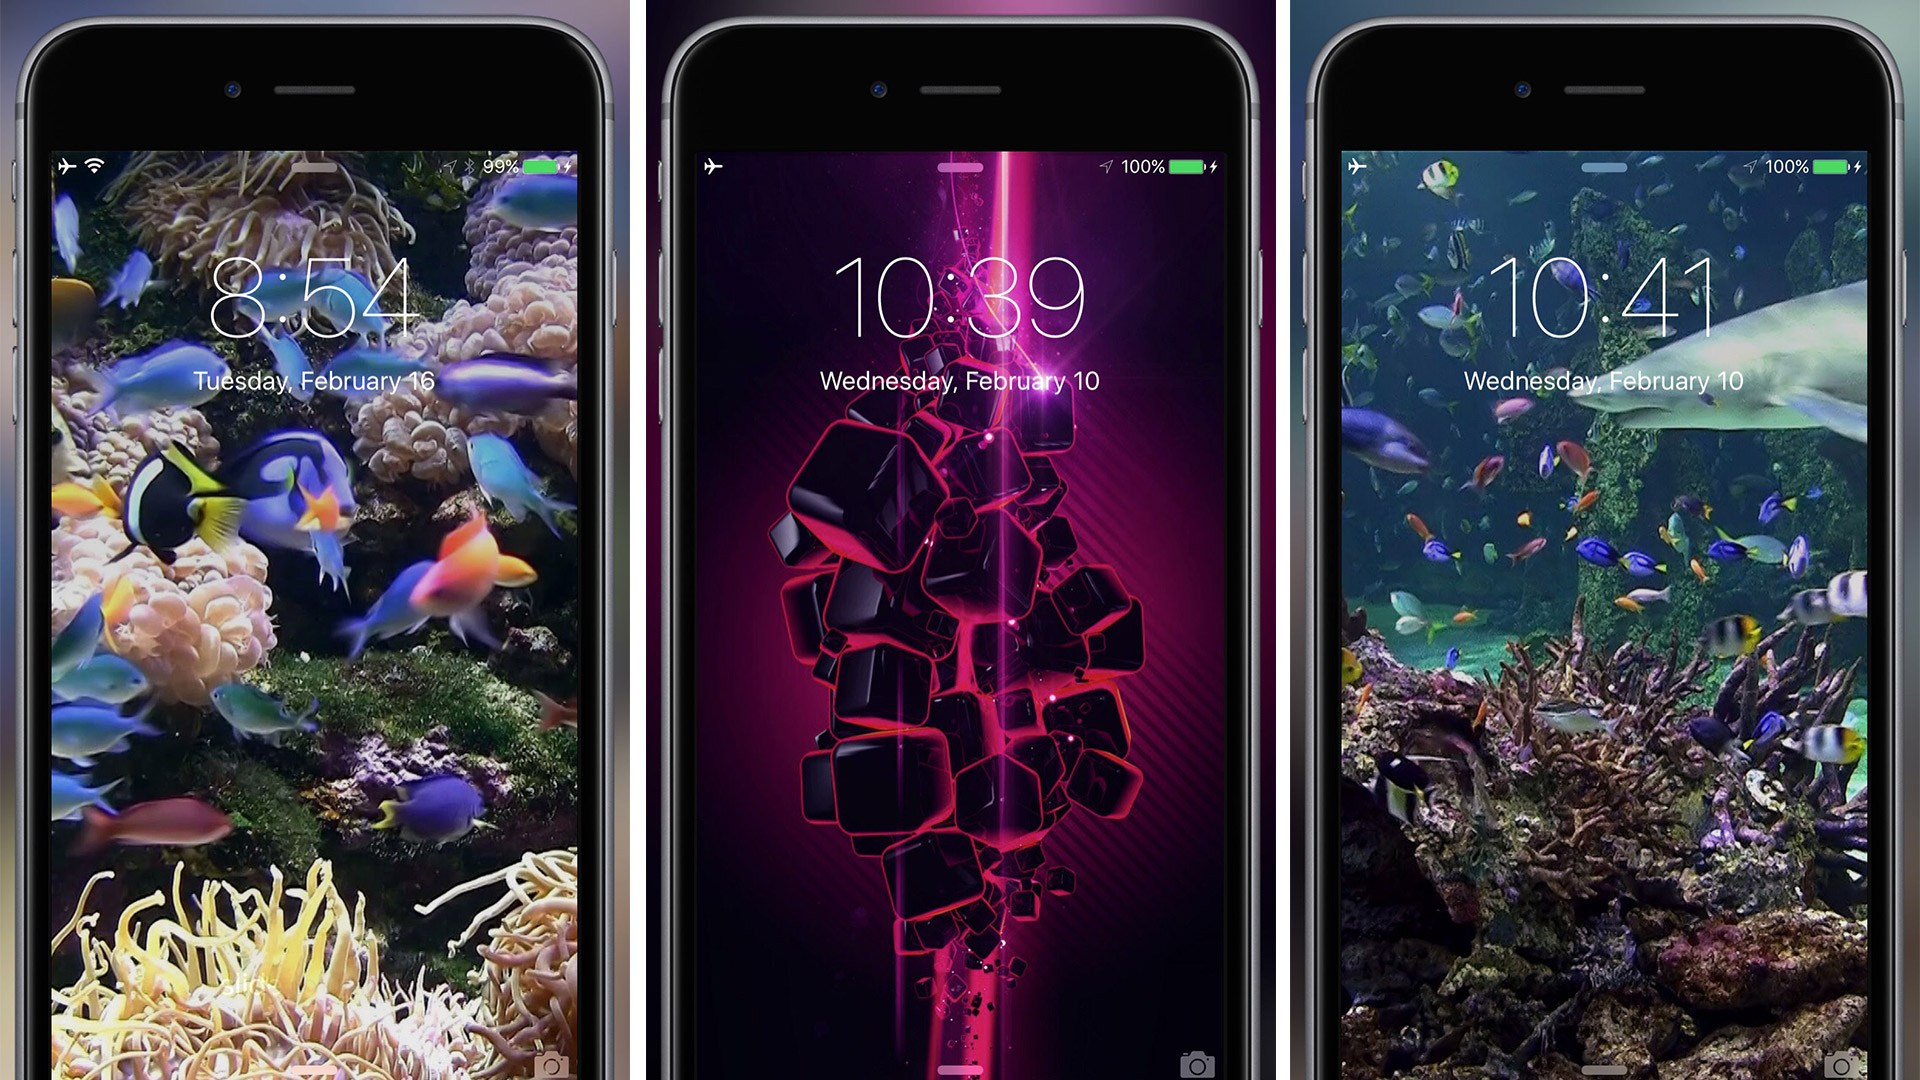 Live Wallpaper Apps for iPhone X